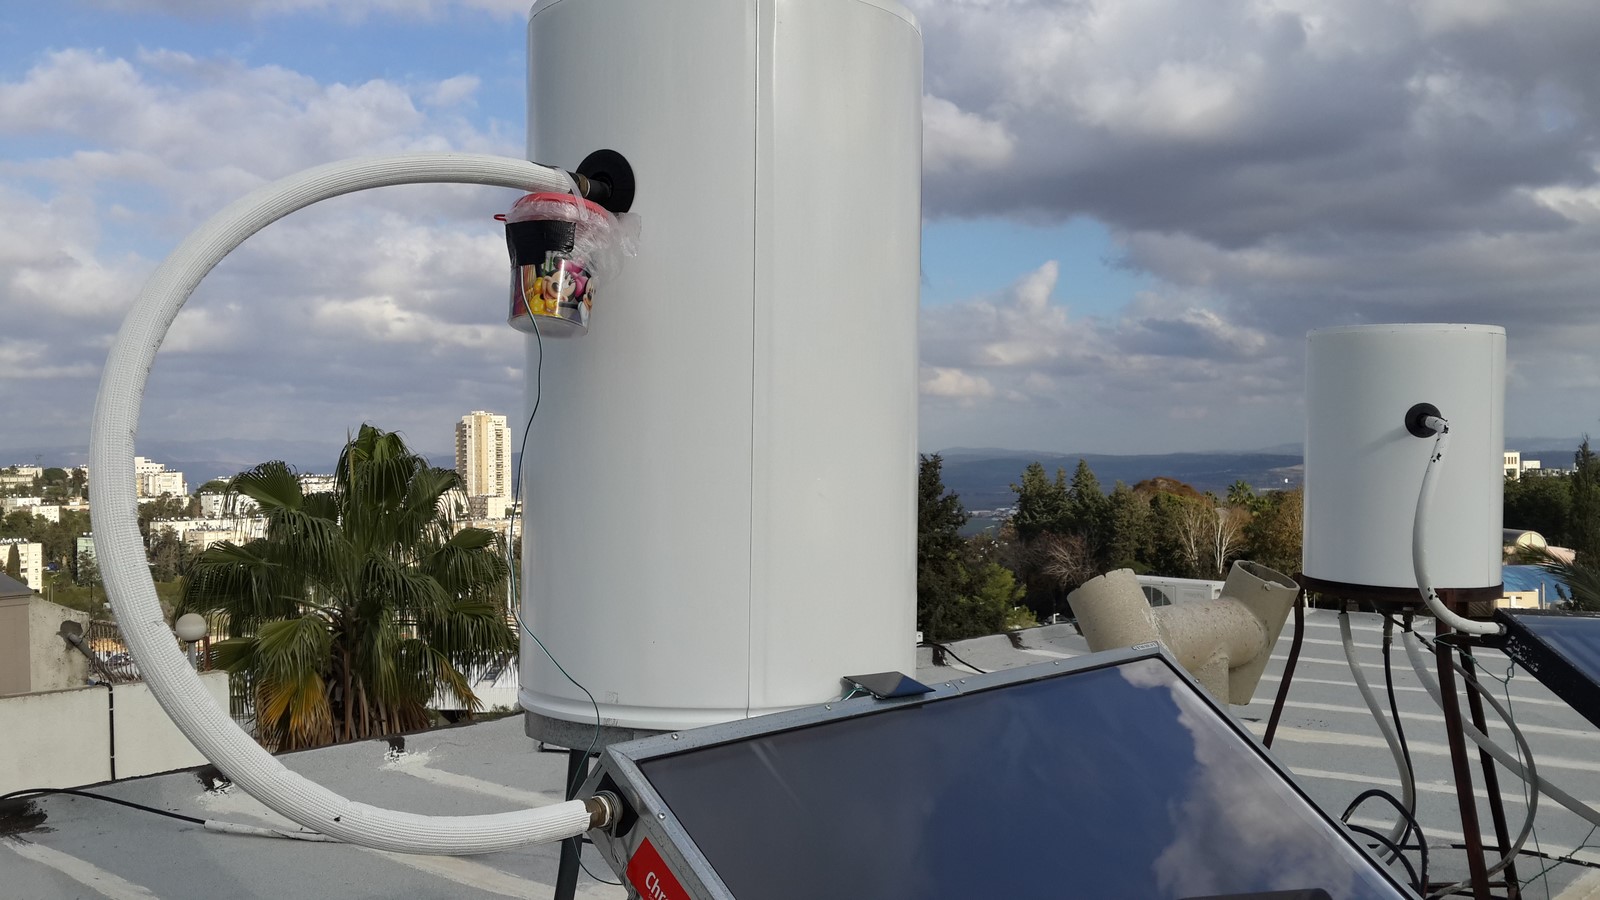 Solar powered ESP8266 on a water heater